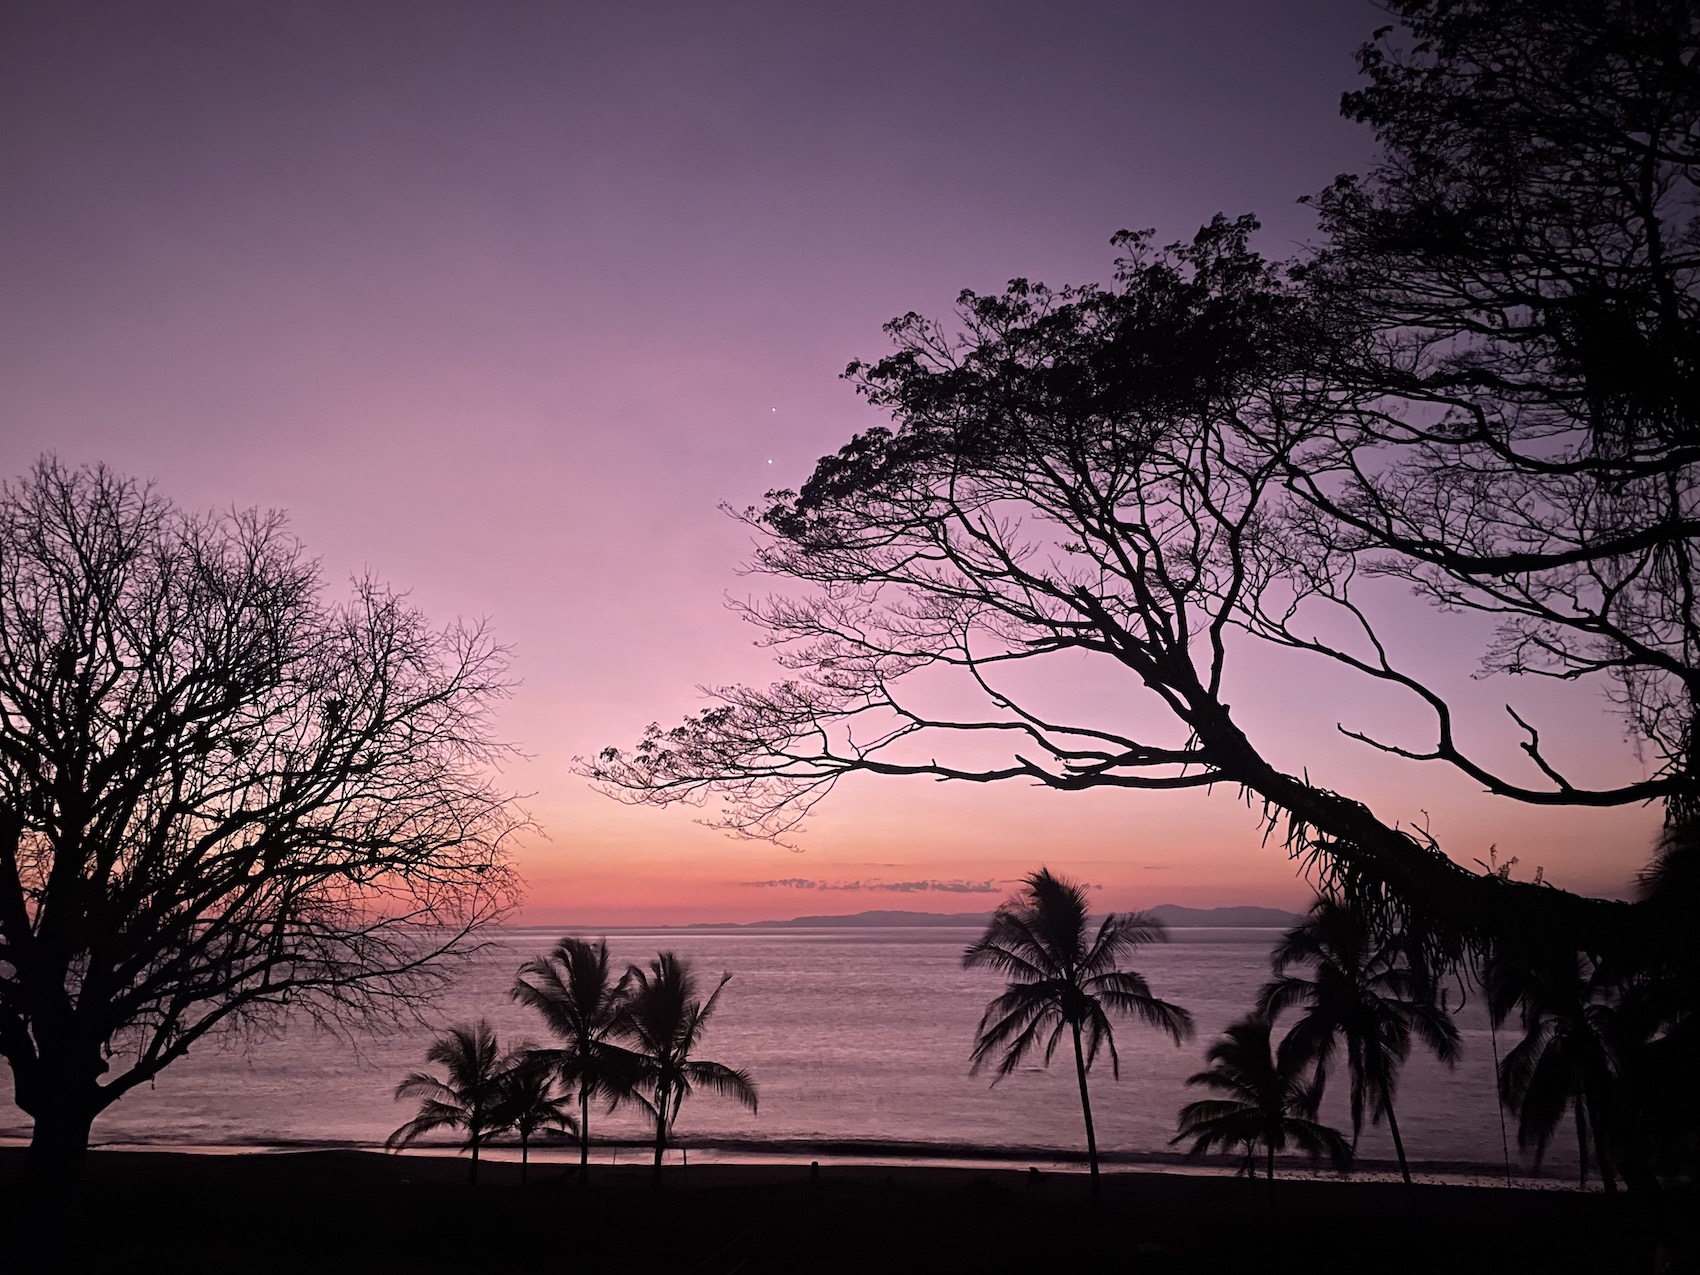 A pink sunset shines through trees along an ocean beach. Mountains lie low on a distant horizon beyond the sea.